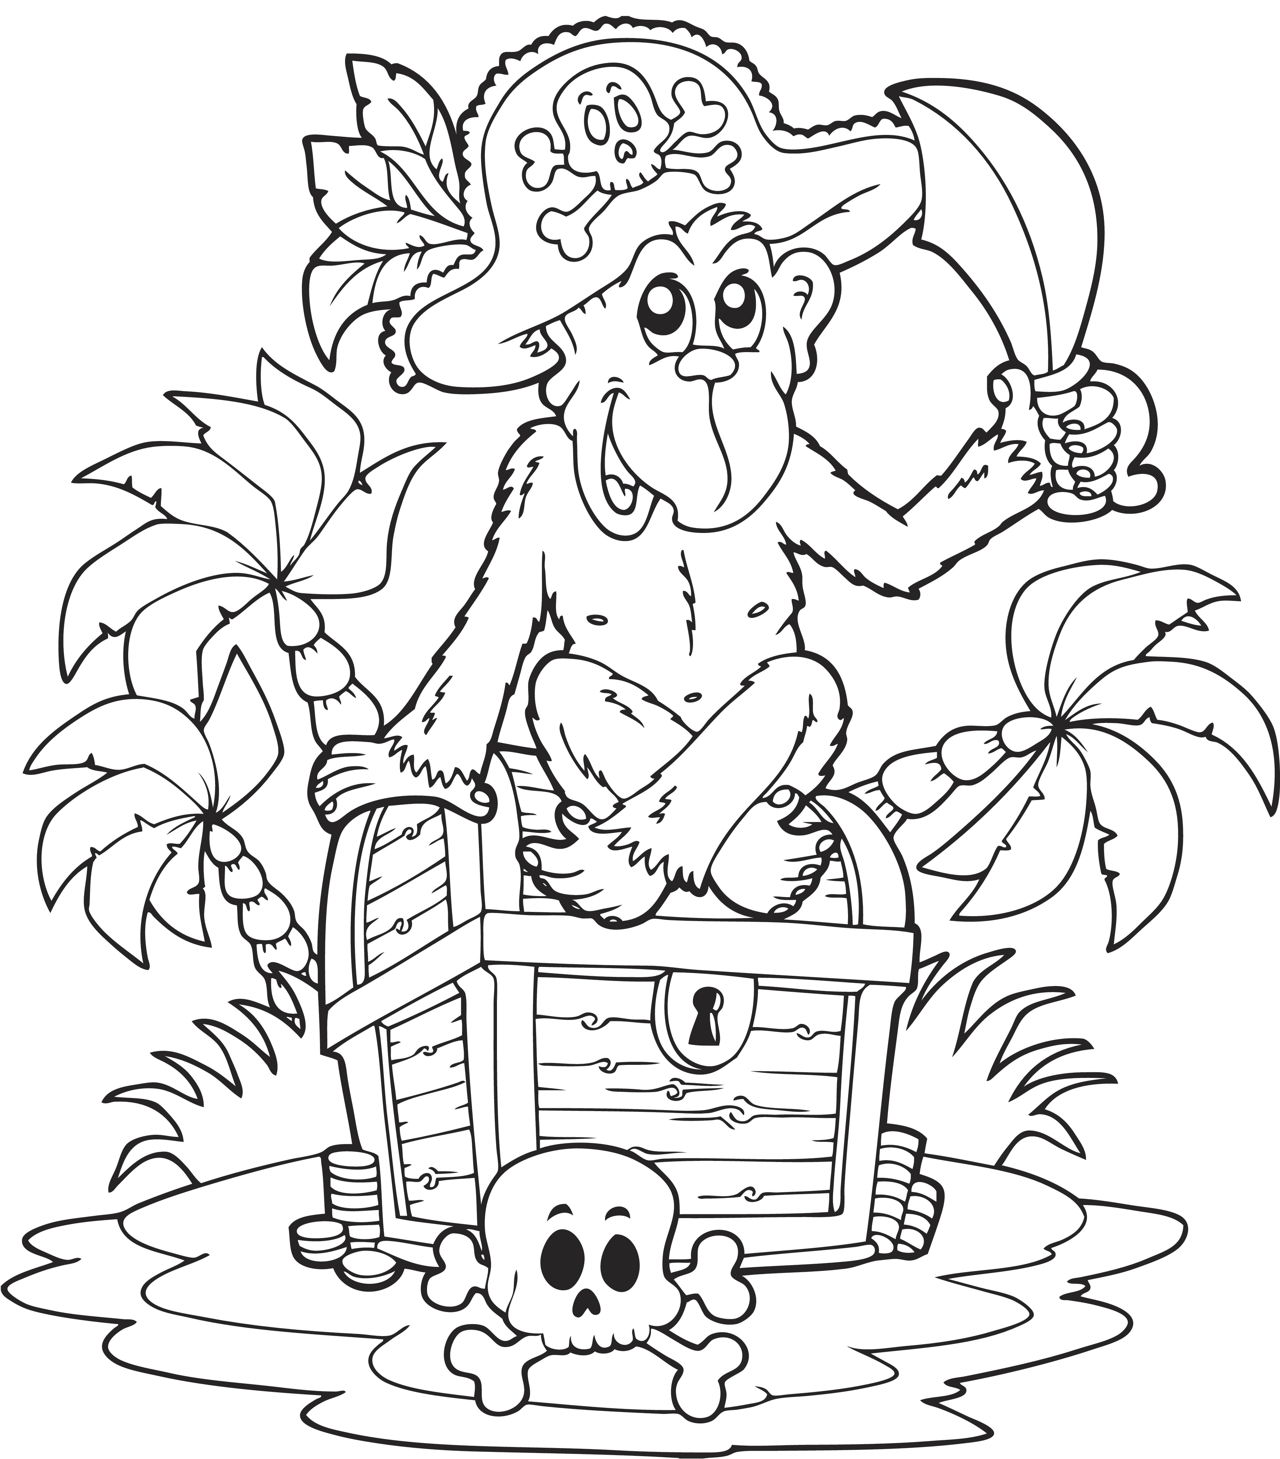 pirate-coloring-pages-printable